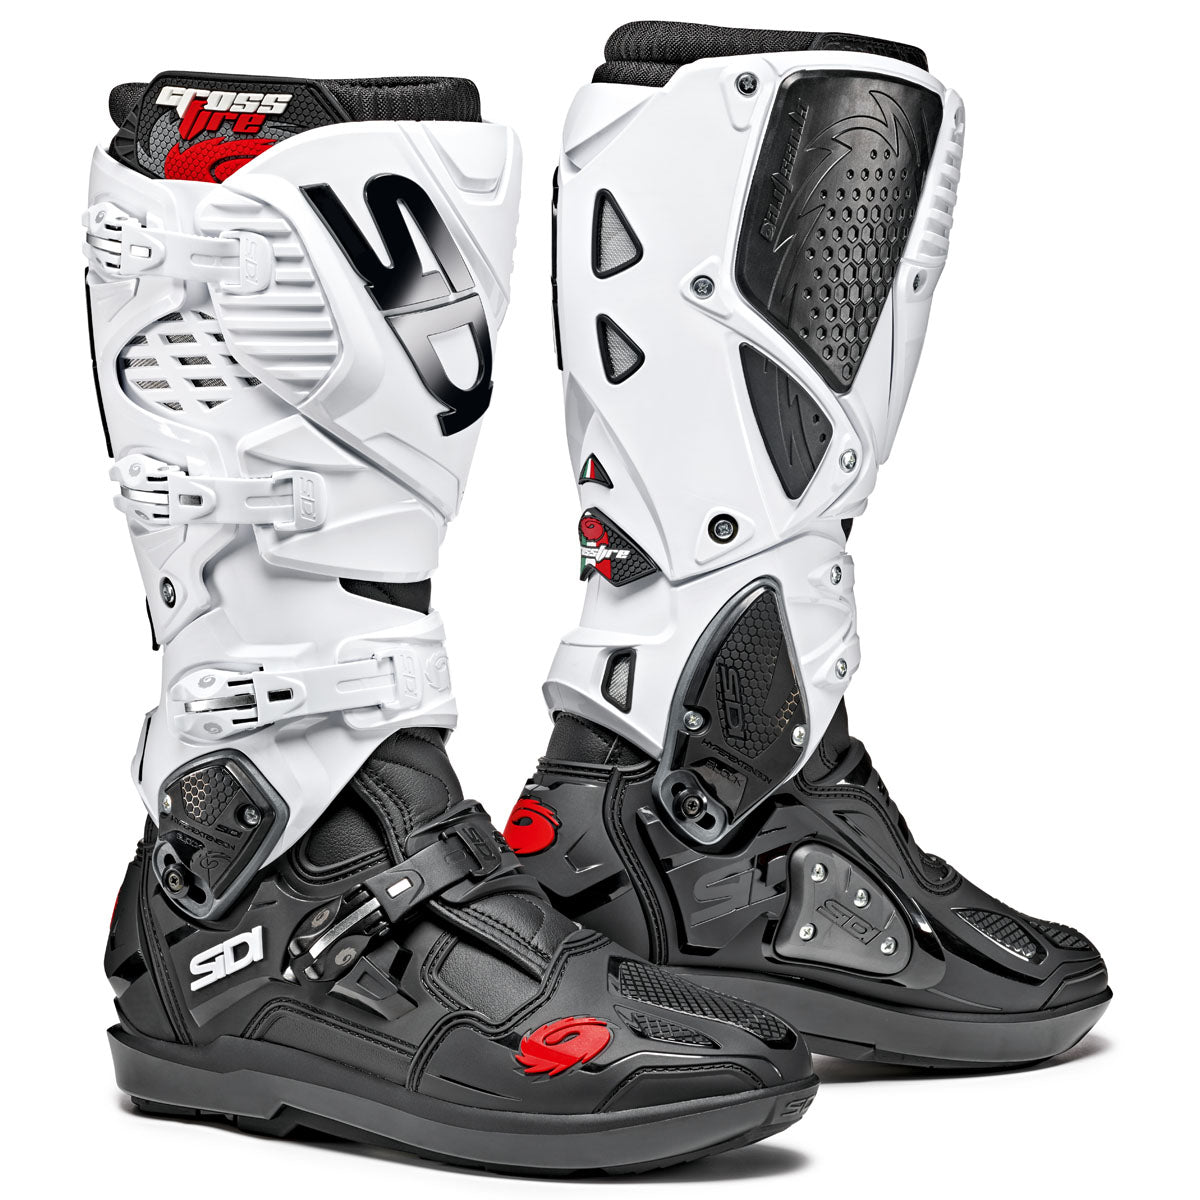 Sidi Crossfire 3 SRS Off-Road Motorcycle Boots - Black/White